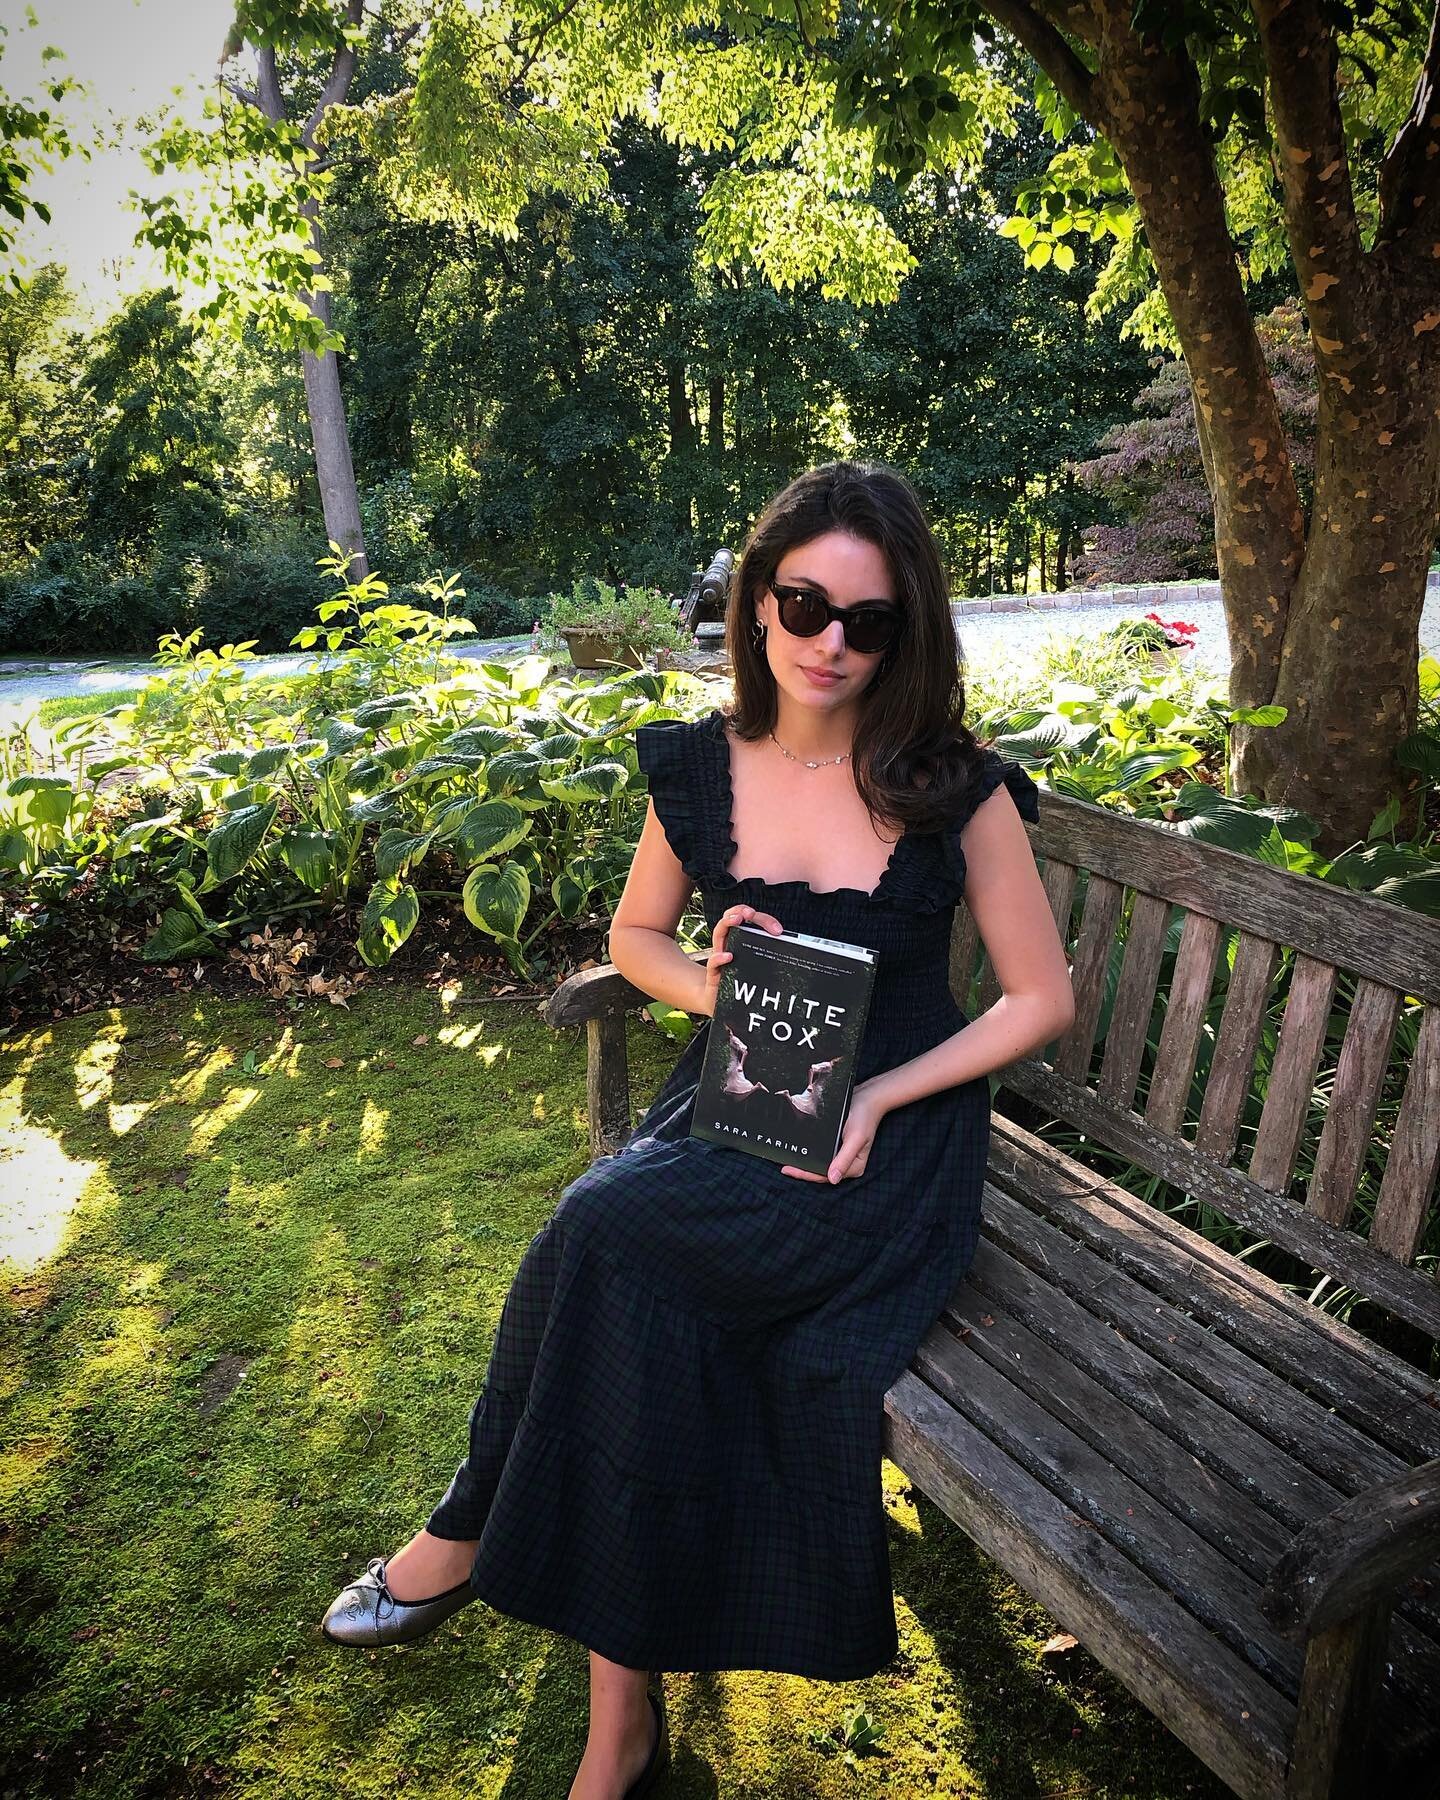 ✨TOMORROW! 

🥂To celebrate &amp; unwind before White Fox release day tomorrow, I took my book on a v. romantic date.

📚Pre-order links are in my bio&mdash;find a copy wherever books are sold, and...

#findwhitefox

🎵 (yes that song was on the radi